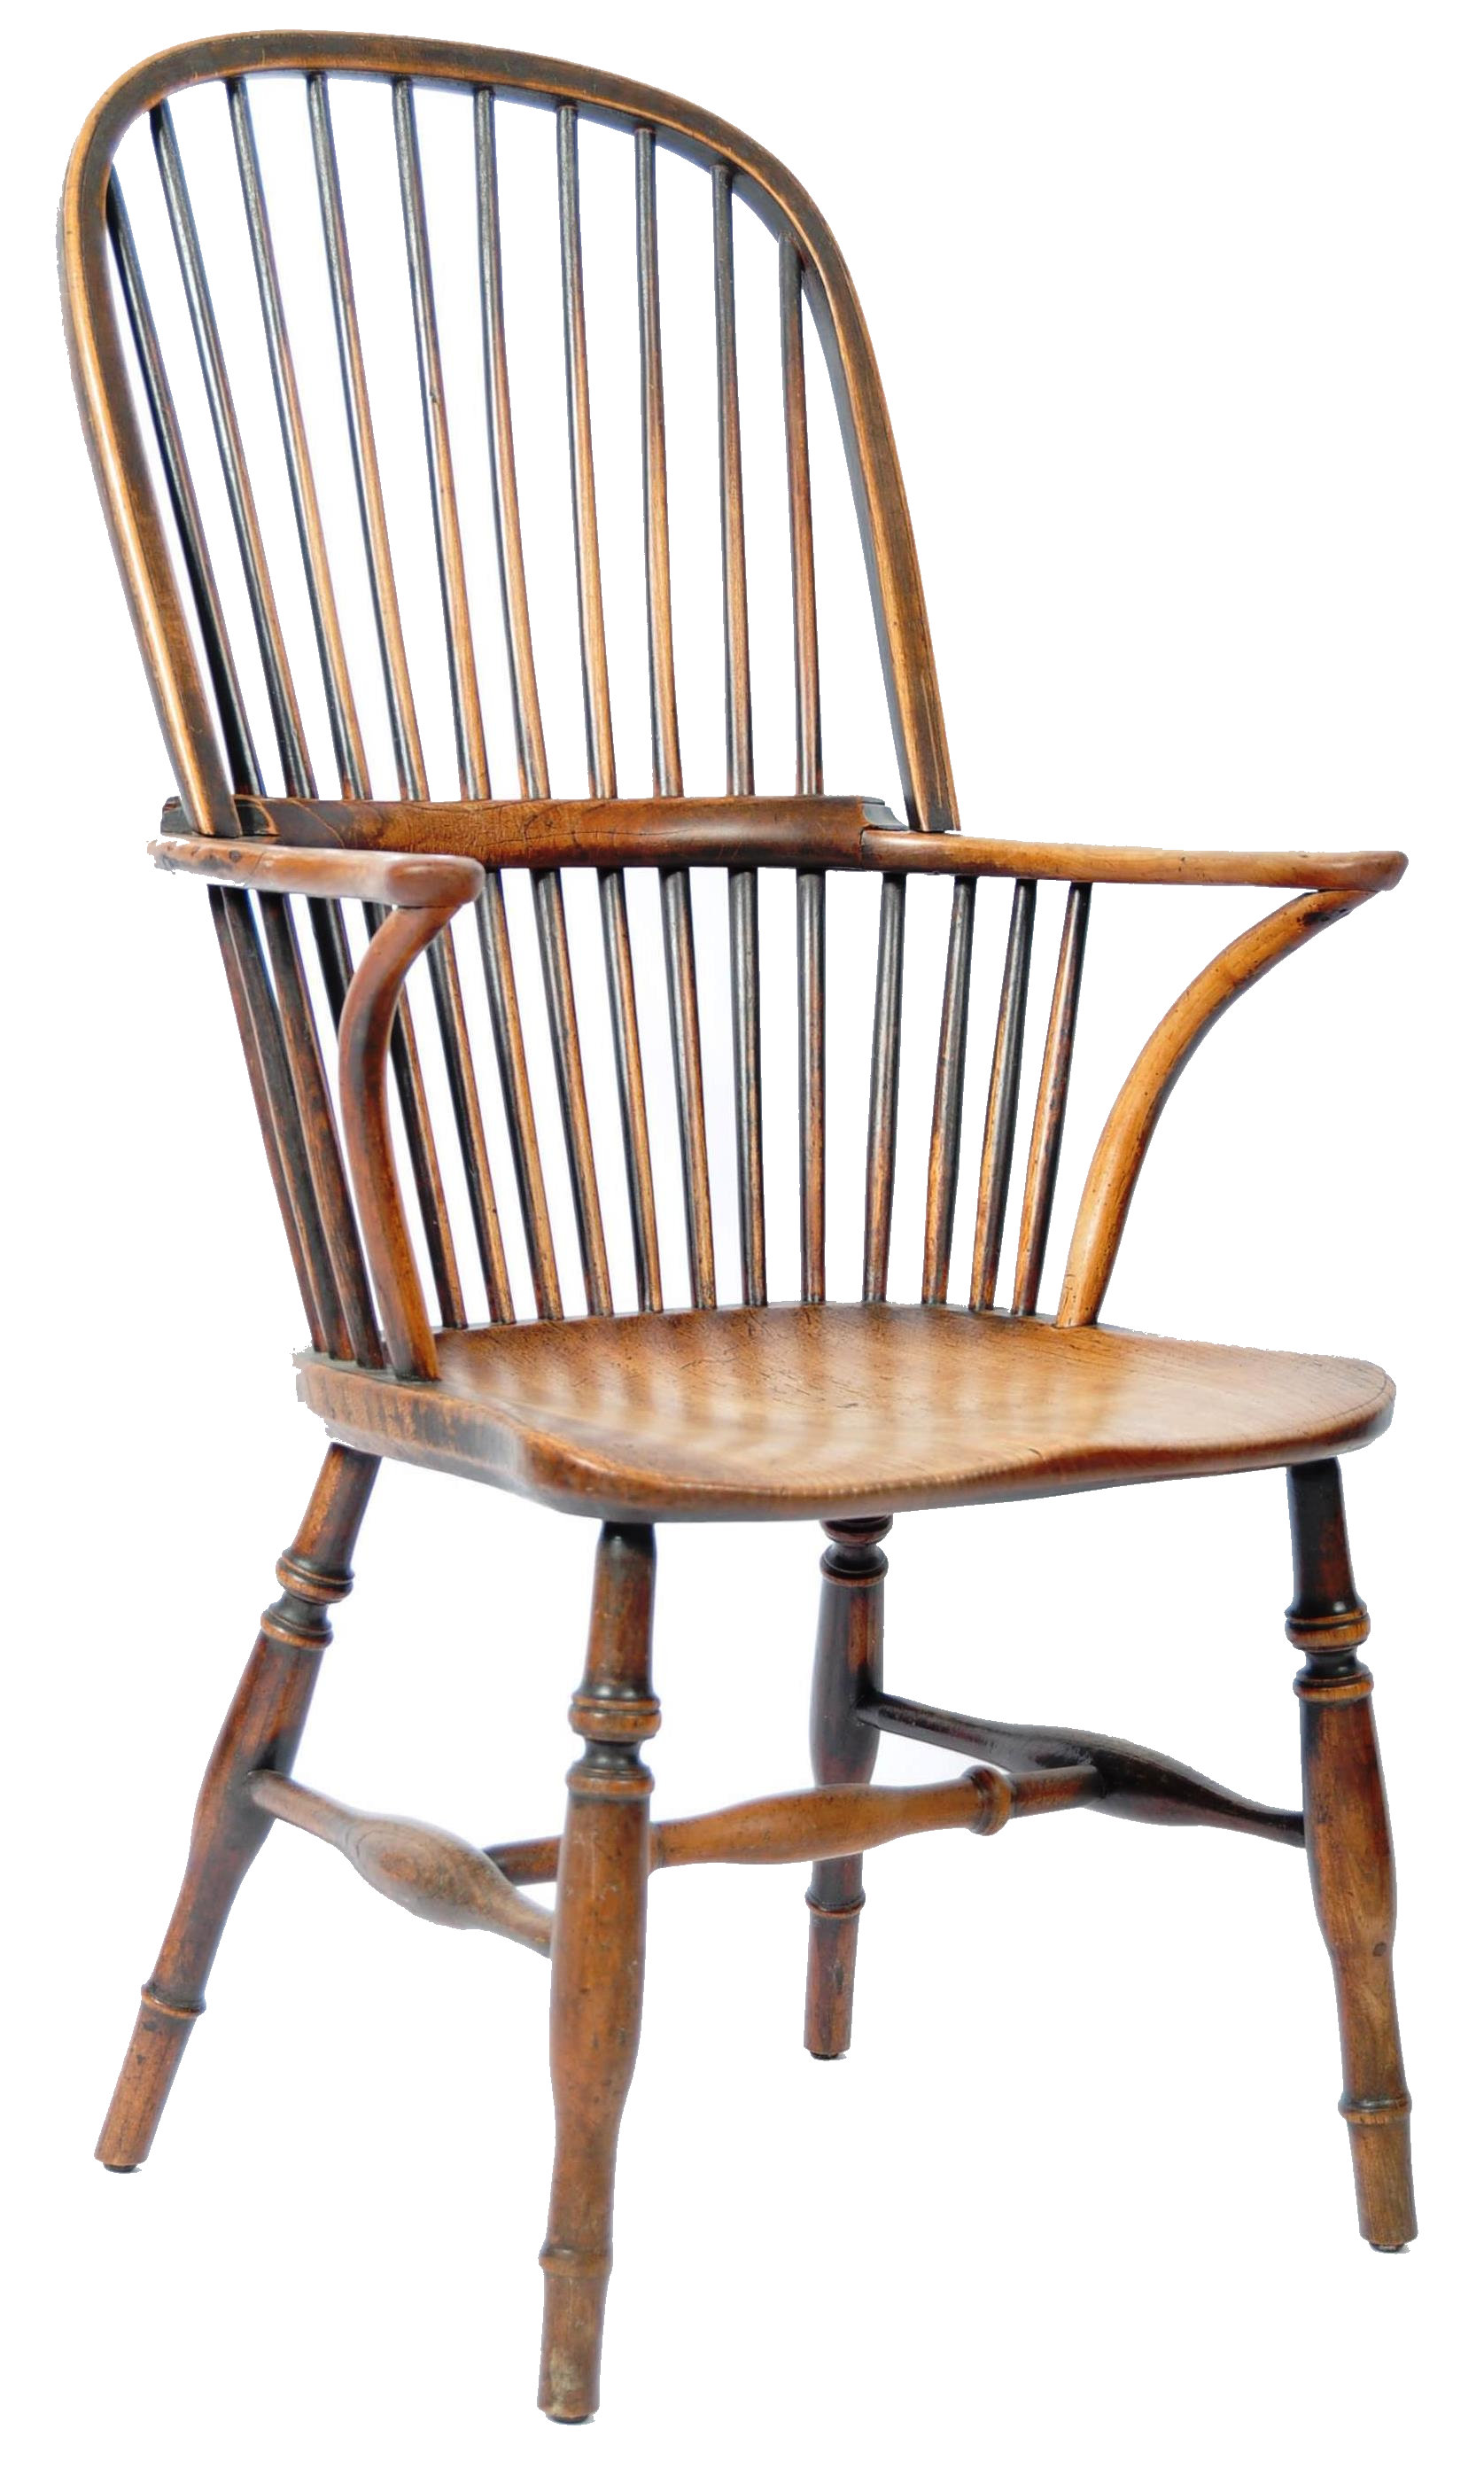 19TH CENTURY ENGLISH ANTIQUE BEECH AND ELM WINDSOR CHAIR